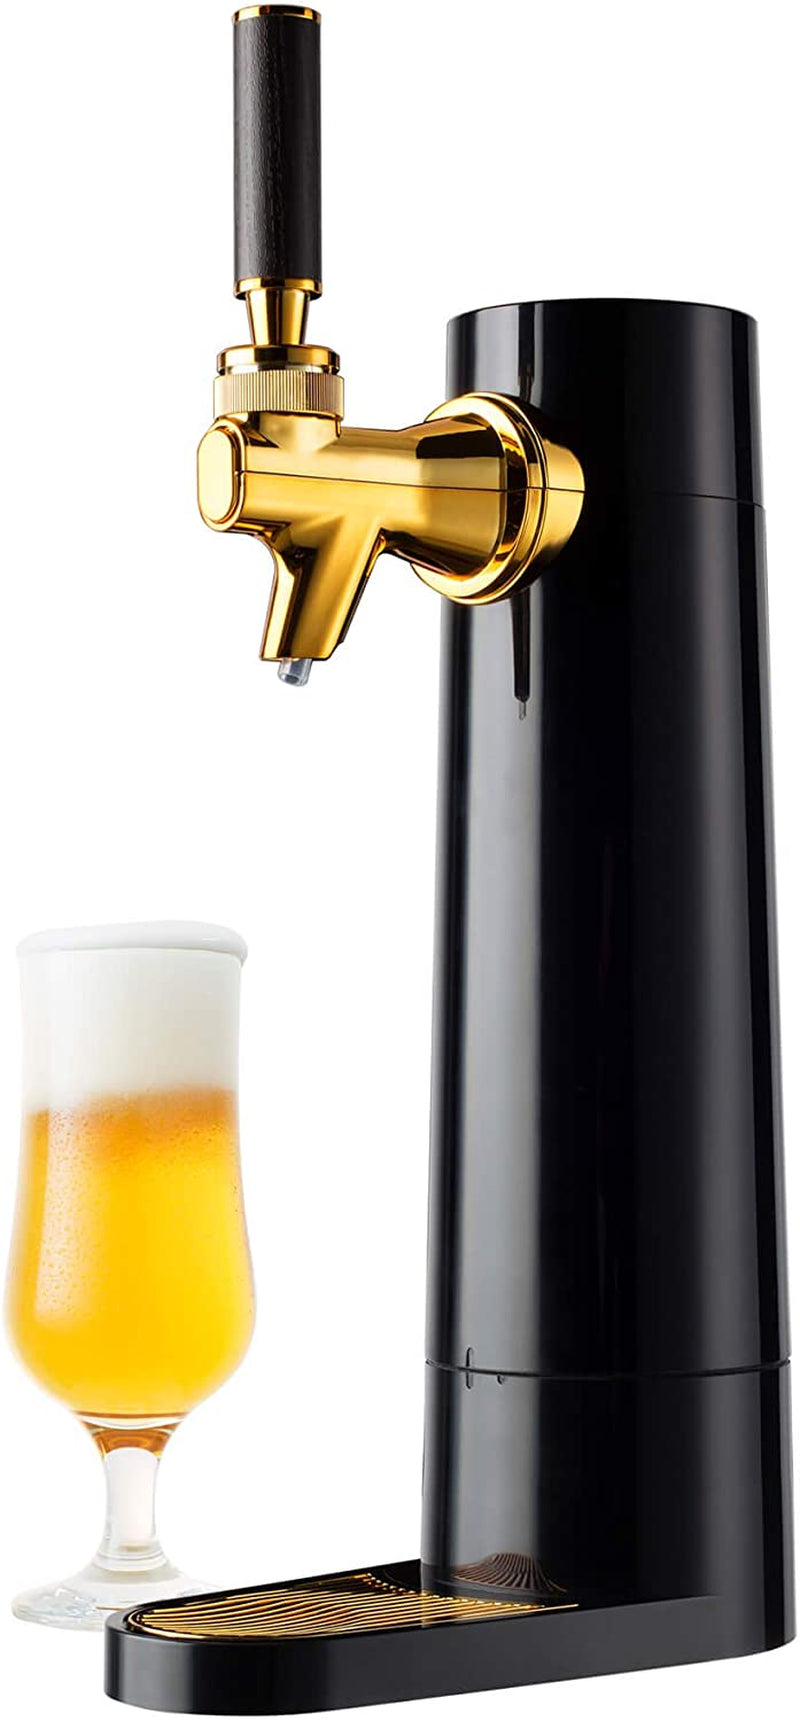 GREEN HOUSE Bottled Beer Foam Maker - Awesome Compact Gift for Beer Lover. Basic Bottled Beer into a Delicious and Perfect Tasty Beer with Ultra Fine Foam.